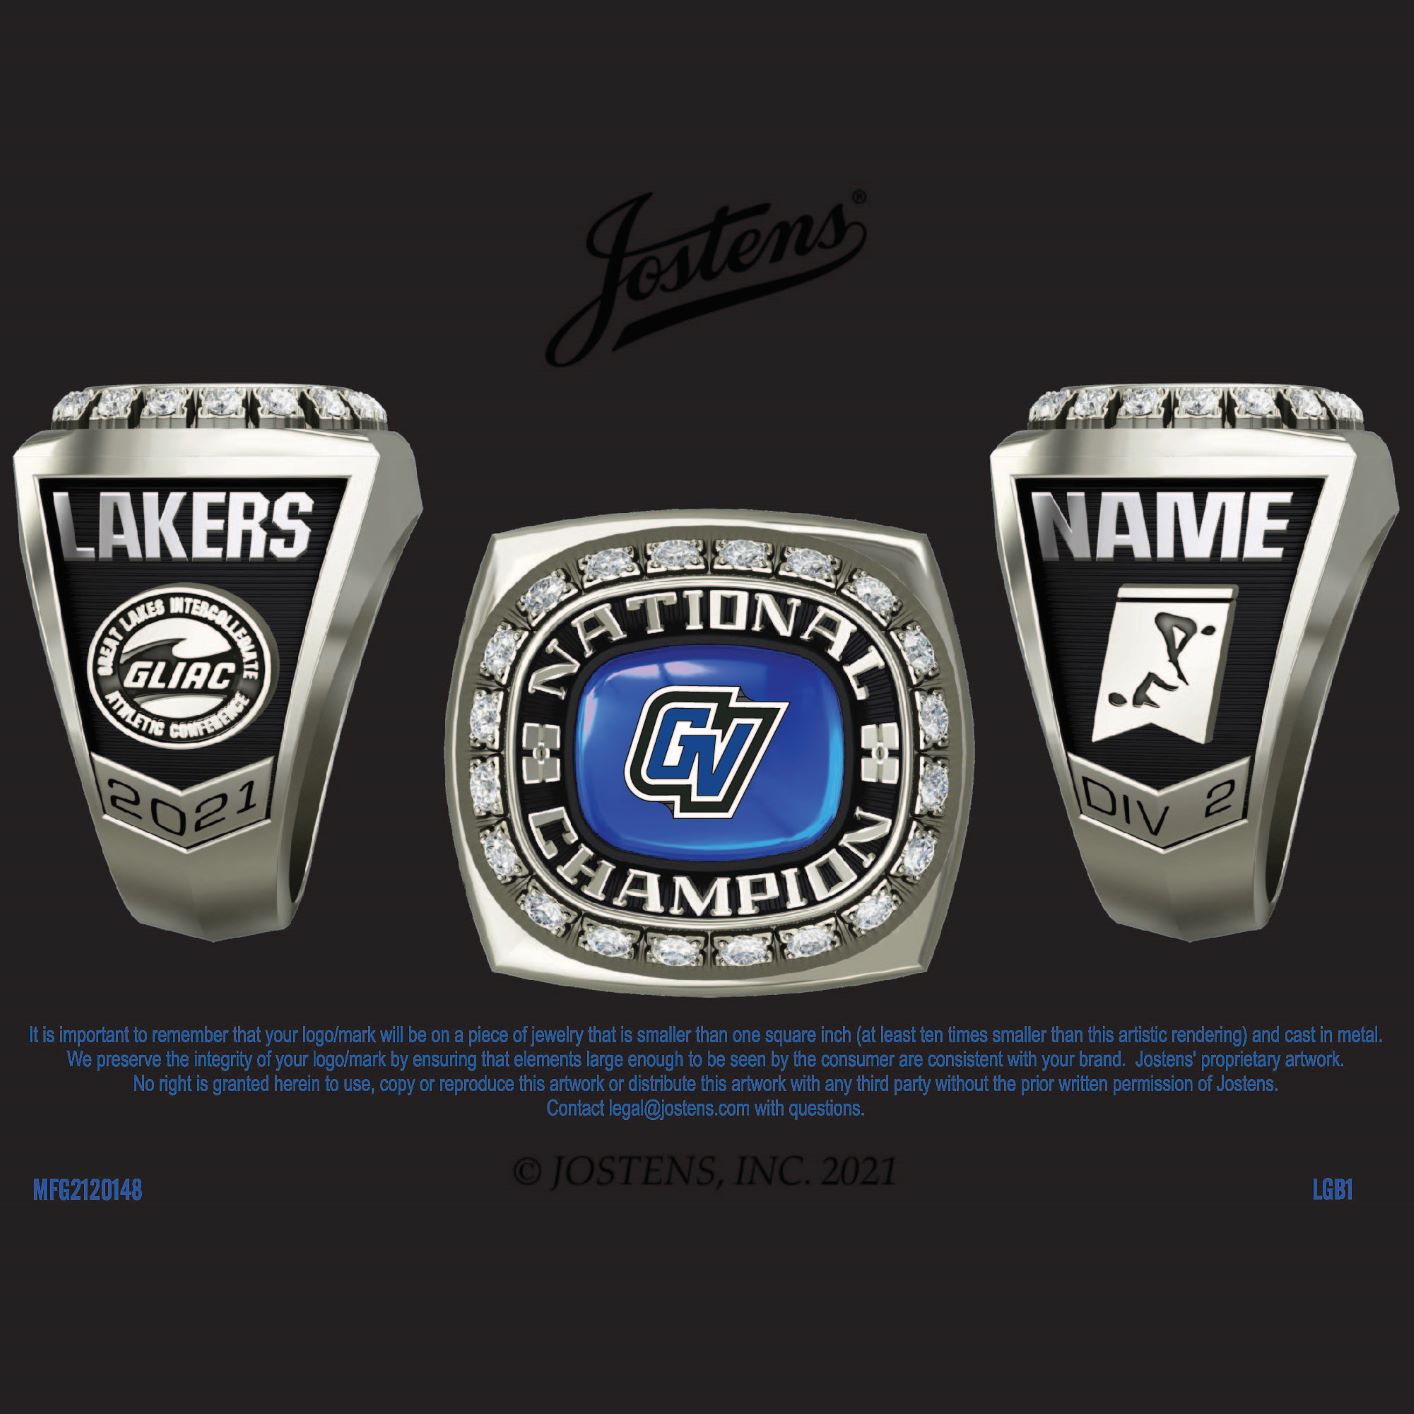 Grand Valley State University Coed Swimming & Diving 2021 National Championship Ring